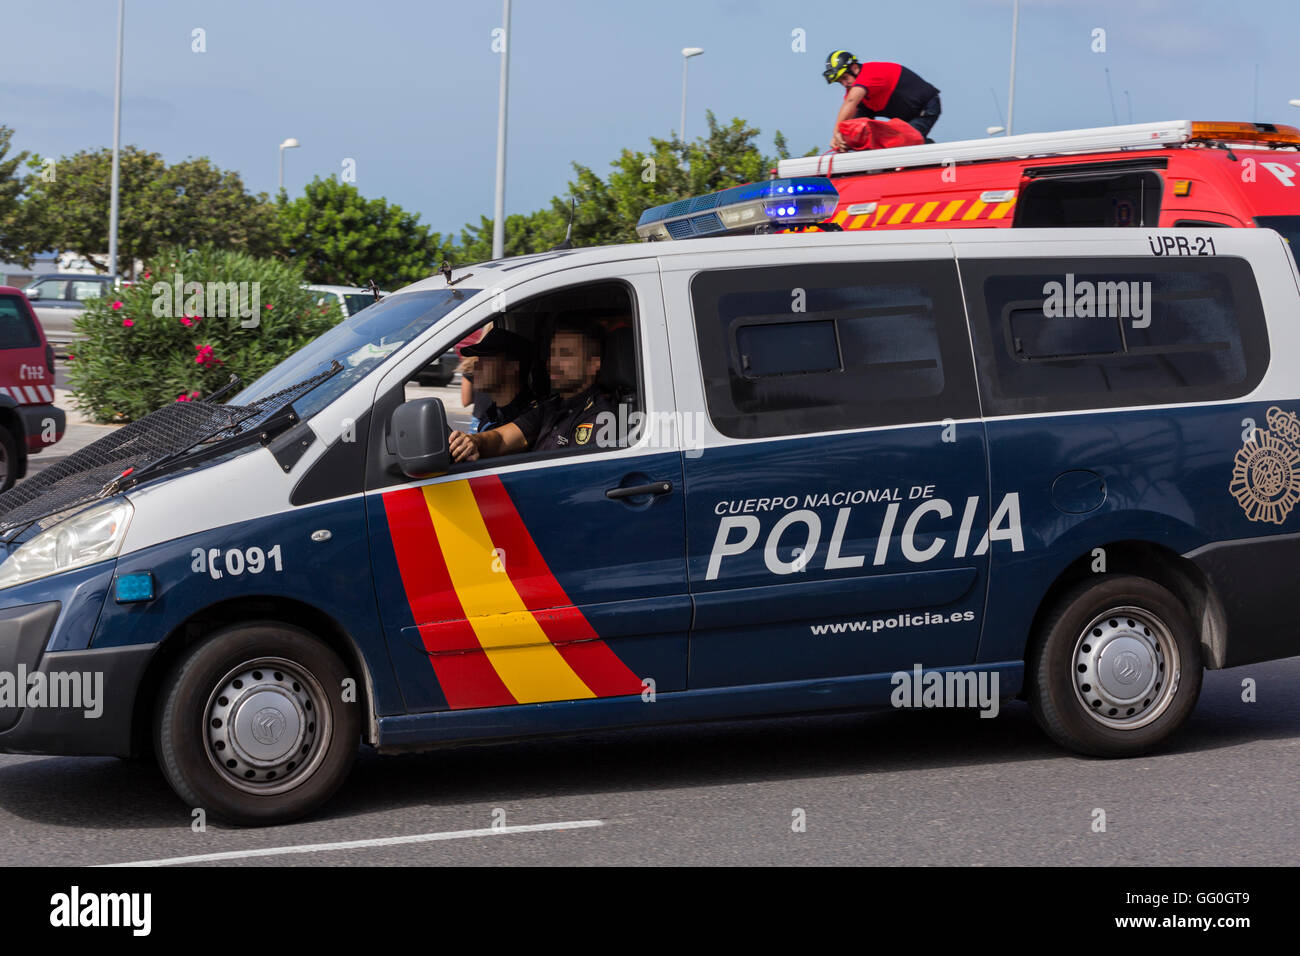 Spanish national police vehicle with agents faces pixellated Stock Photo